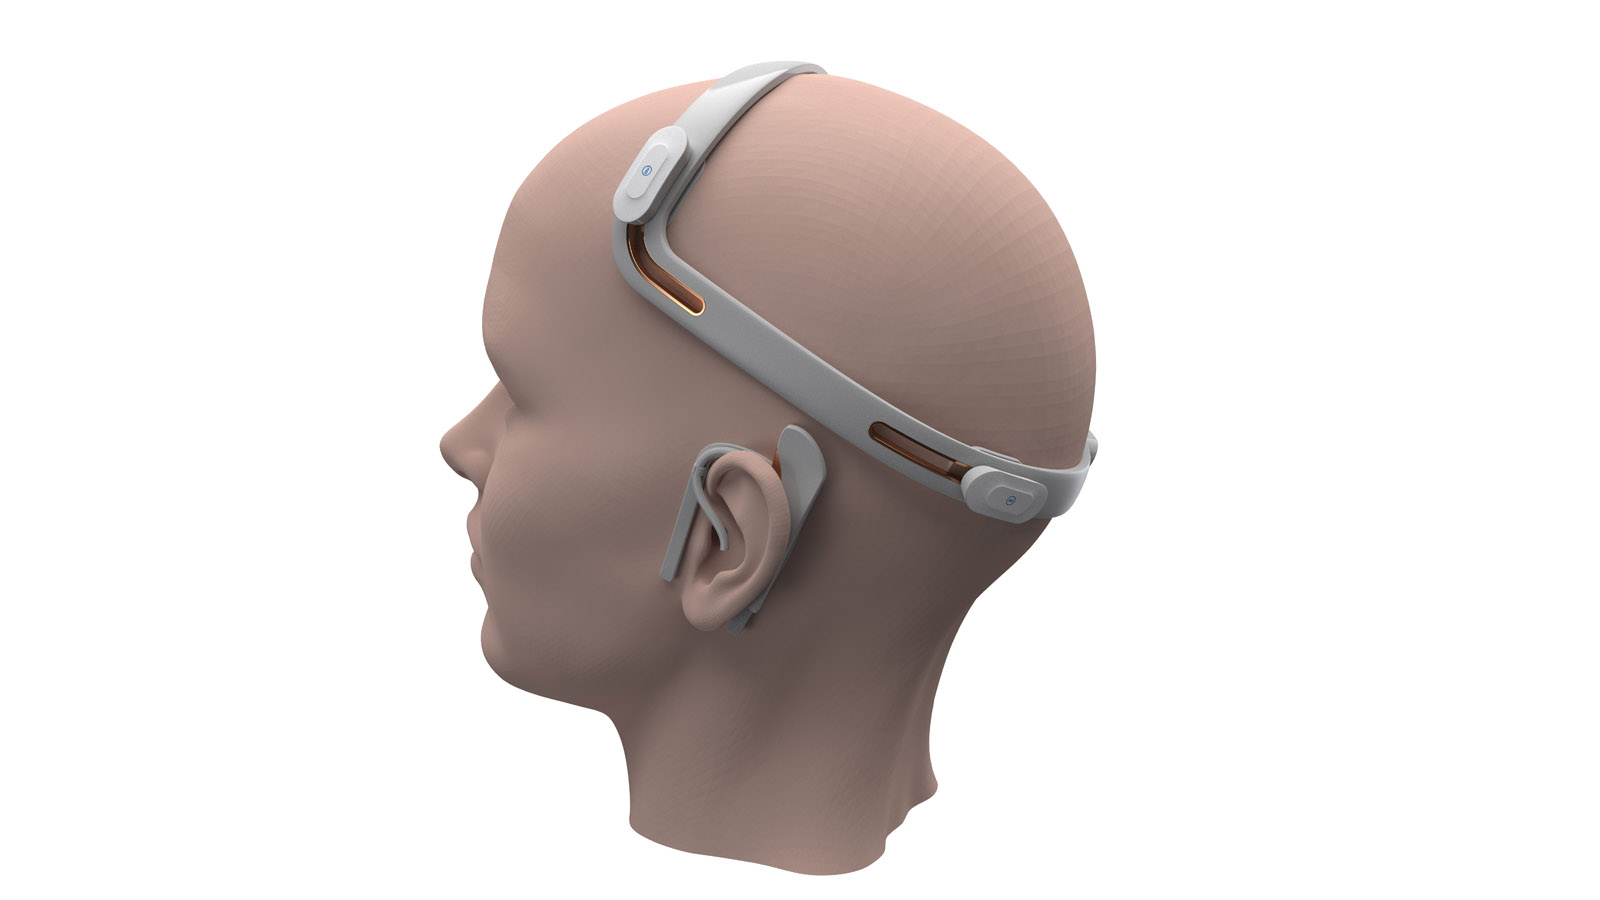 Design vision of a wearable hearing aid developed in the mEEGaHStim project.